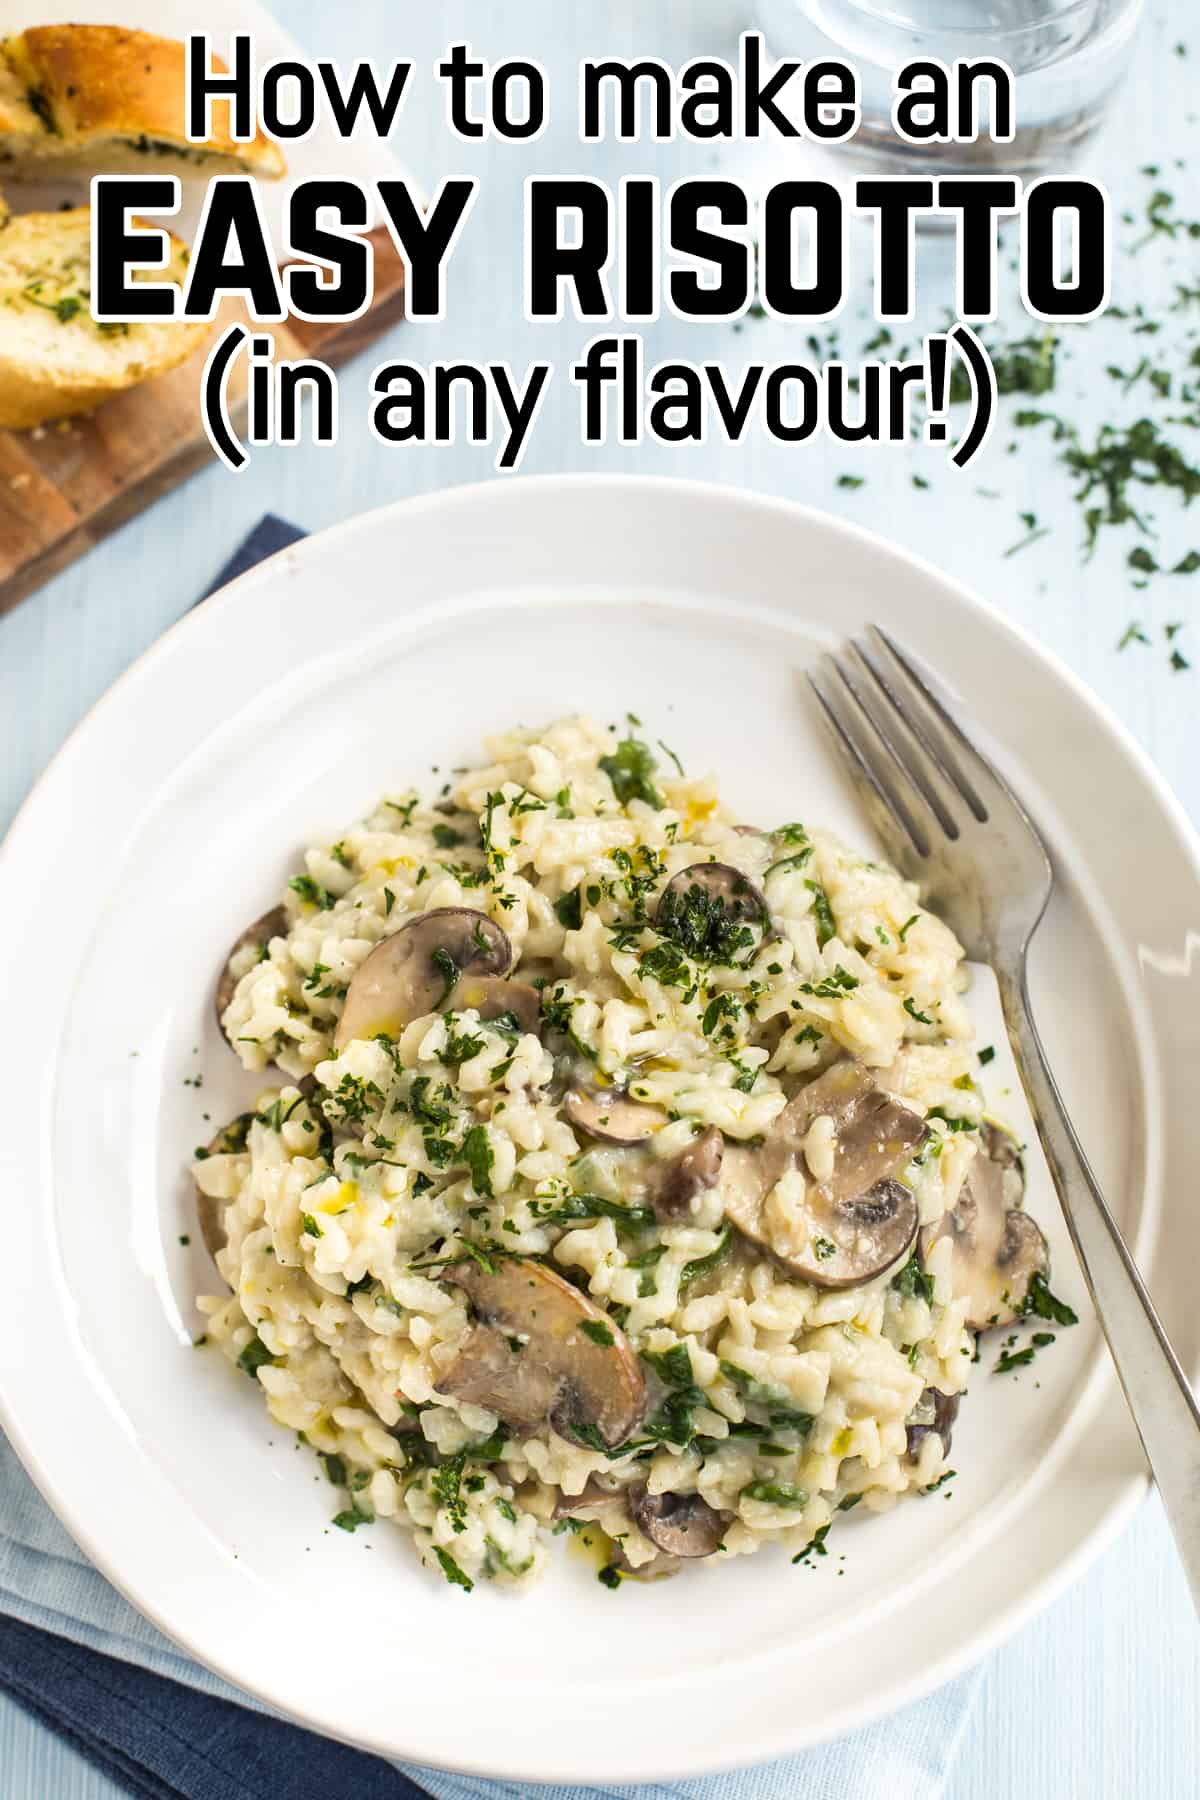 Portion of mushroom risotto in a bowl with a fork.